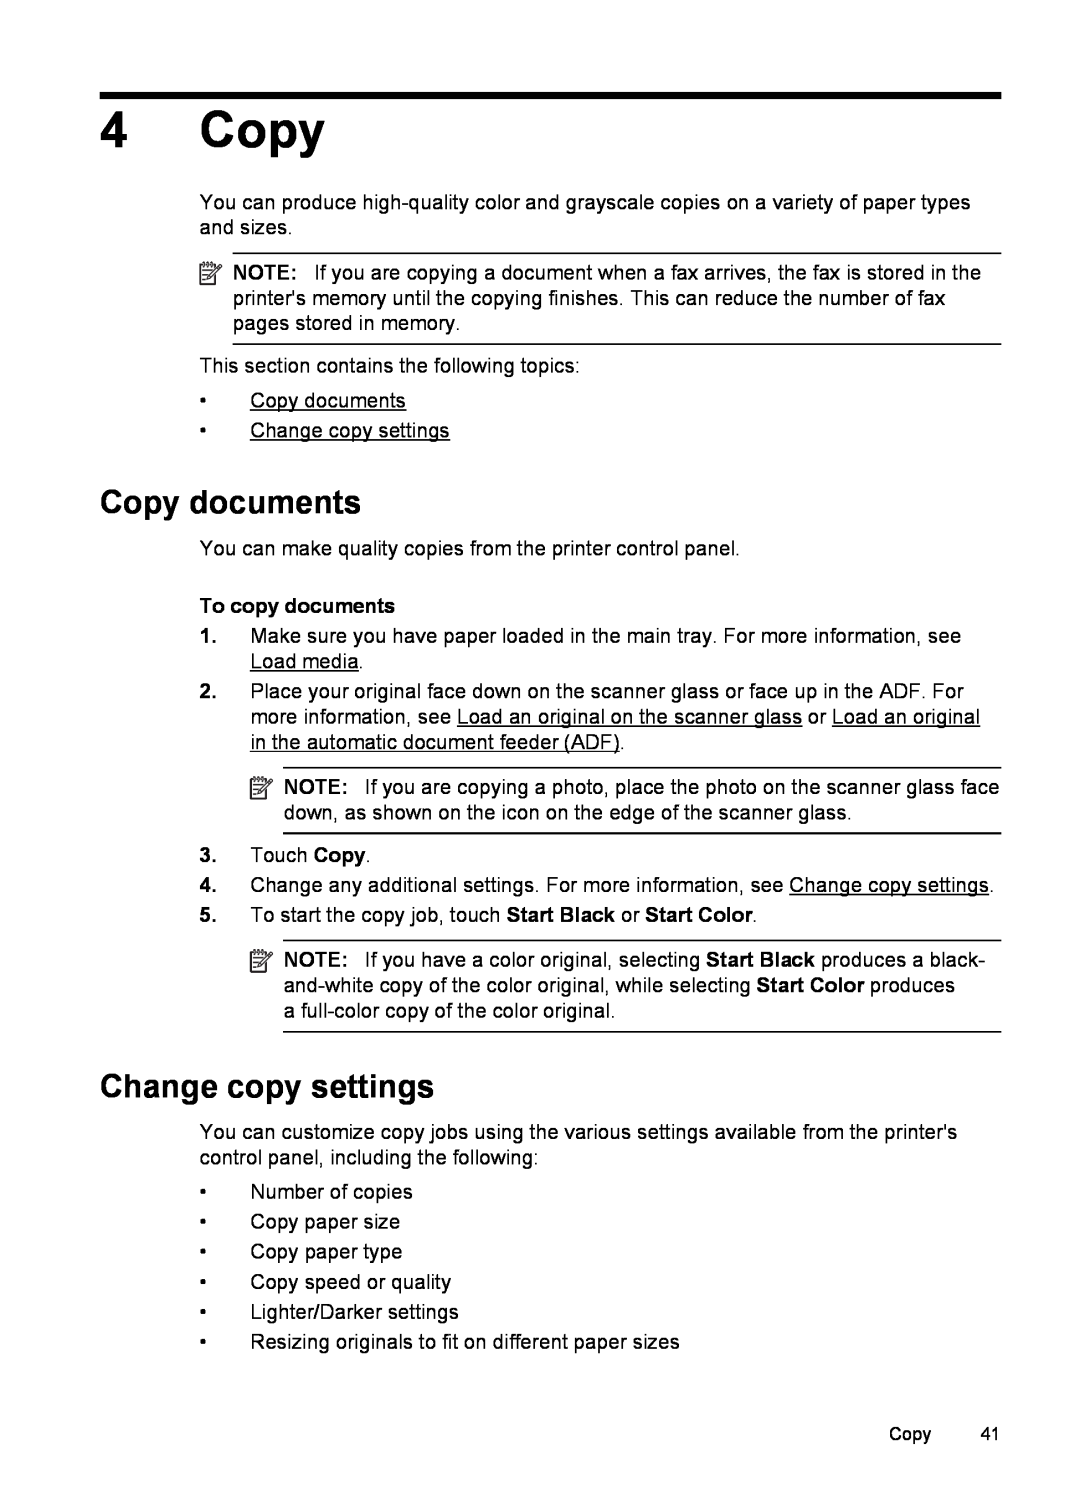 HP 6600 - H7 manual Copy documents, Change copy settings, To copy documents 